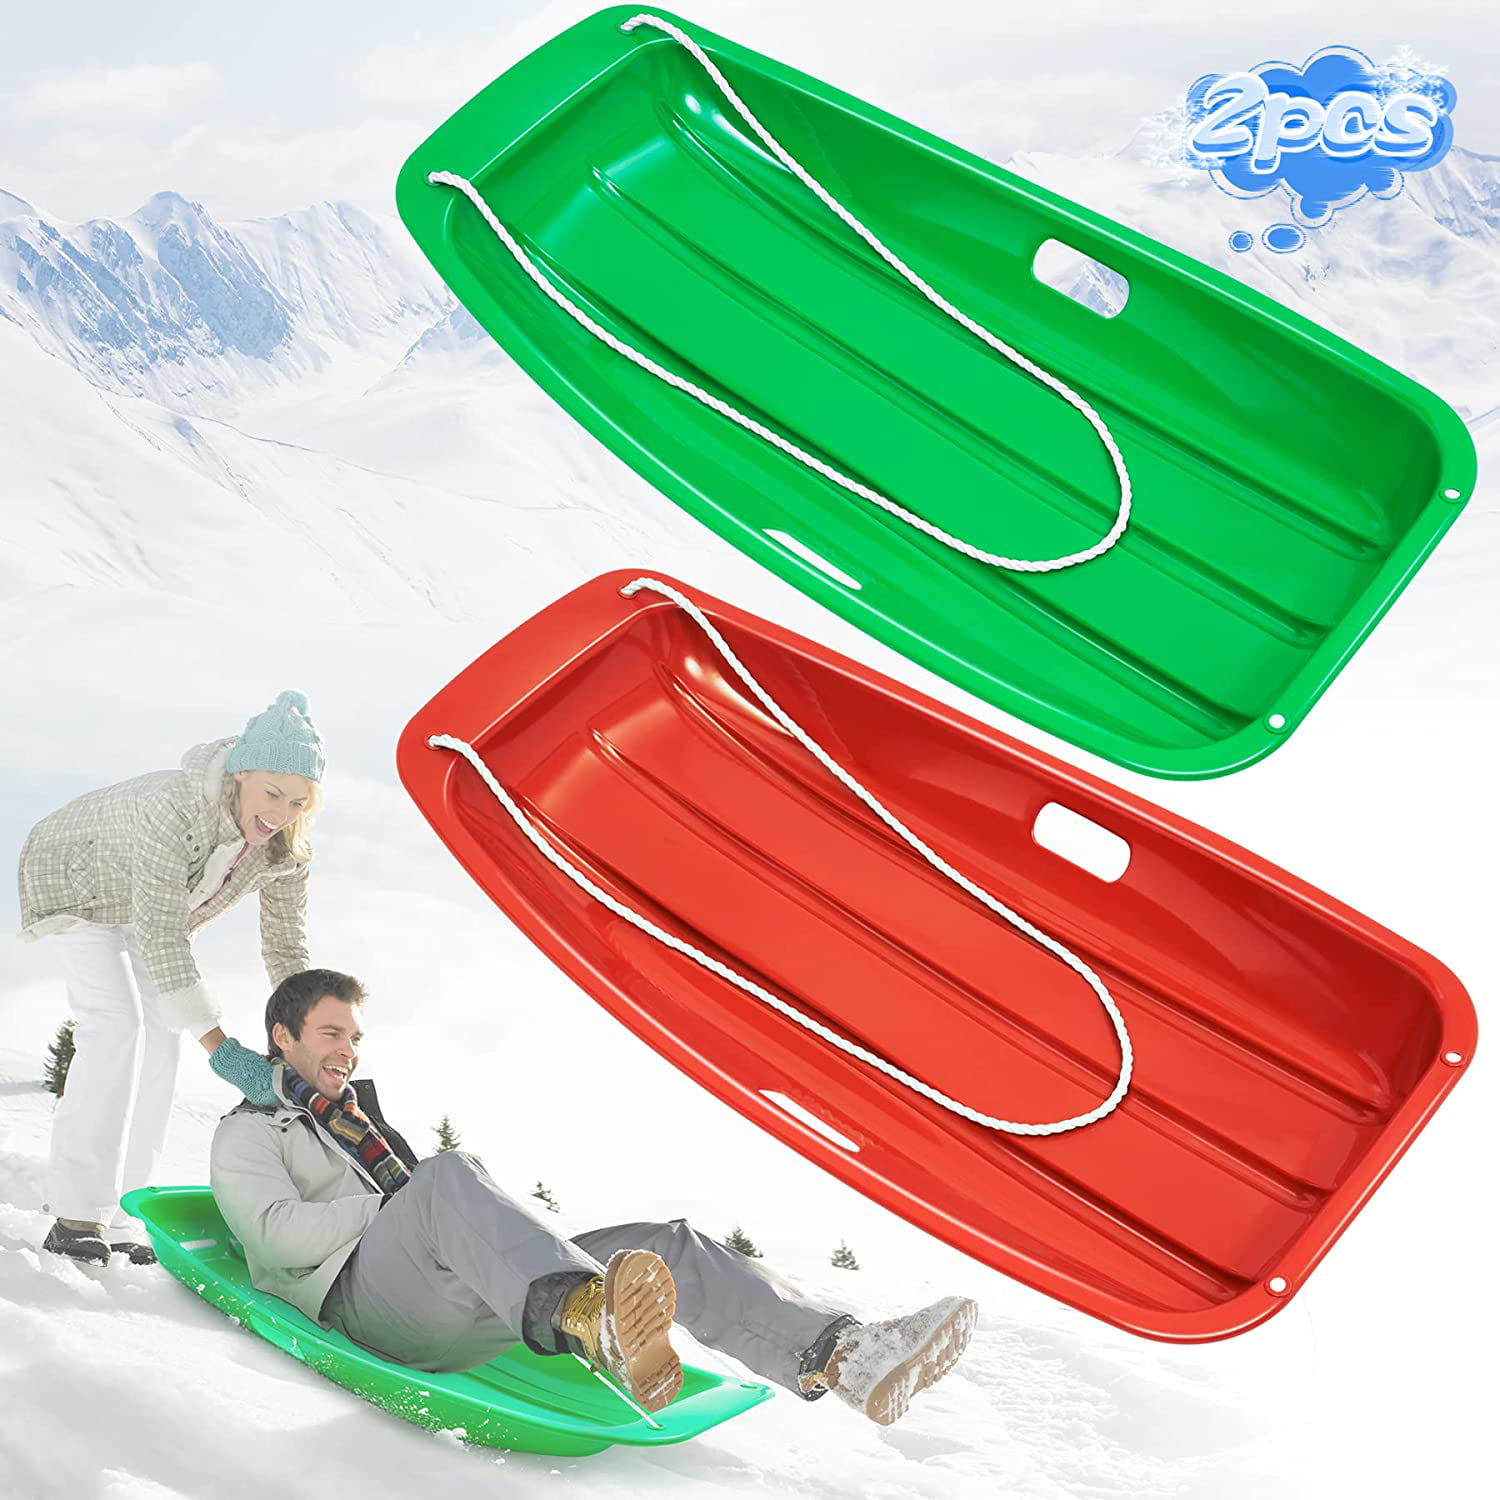 Snow Sled Board,Outdoor Winter Slider Downhill Snow Board High Speed Snow Sled for Toddlers Kids Sleds for Snow with 2 Handles and Pull Ropes